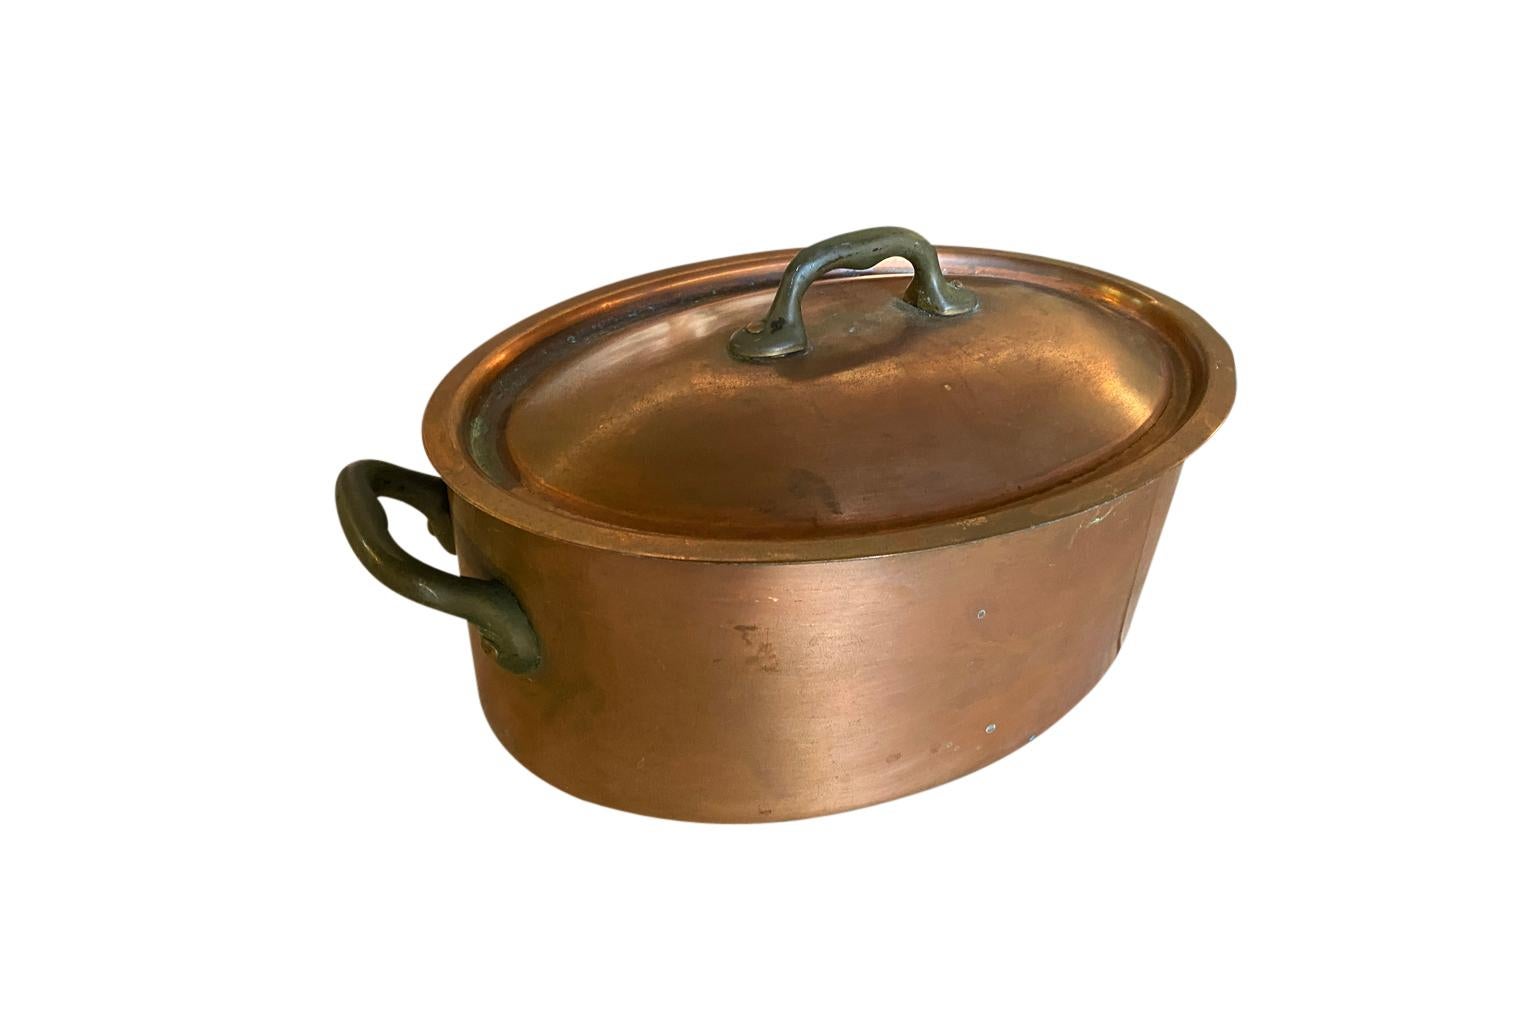 A very charming early 20th century lidded copper pot in an oval shape.  A wonderful addition to any copper collection.